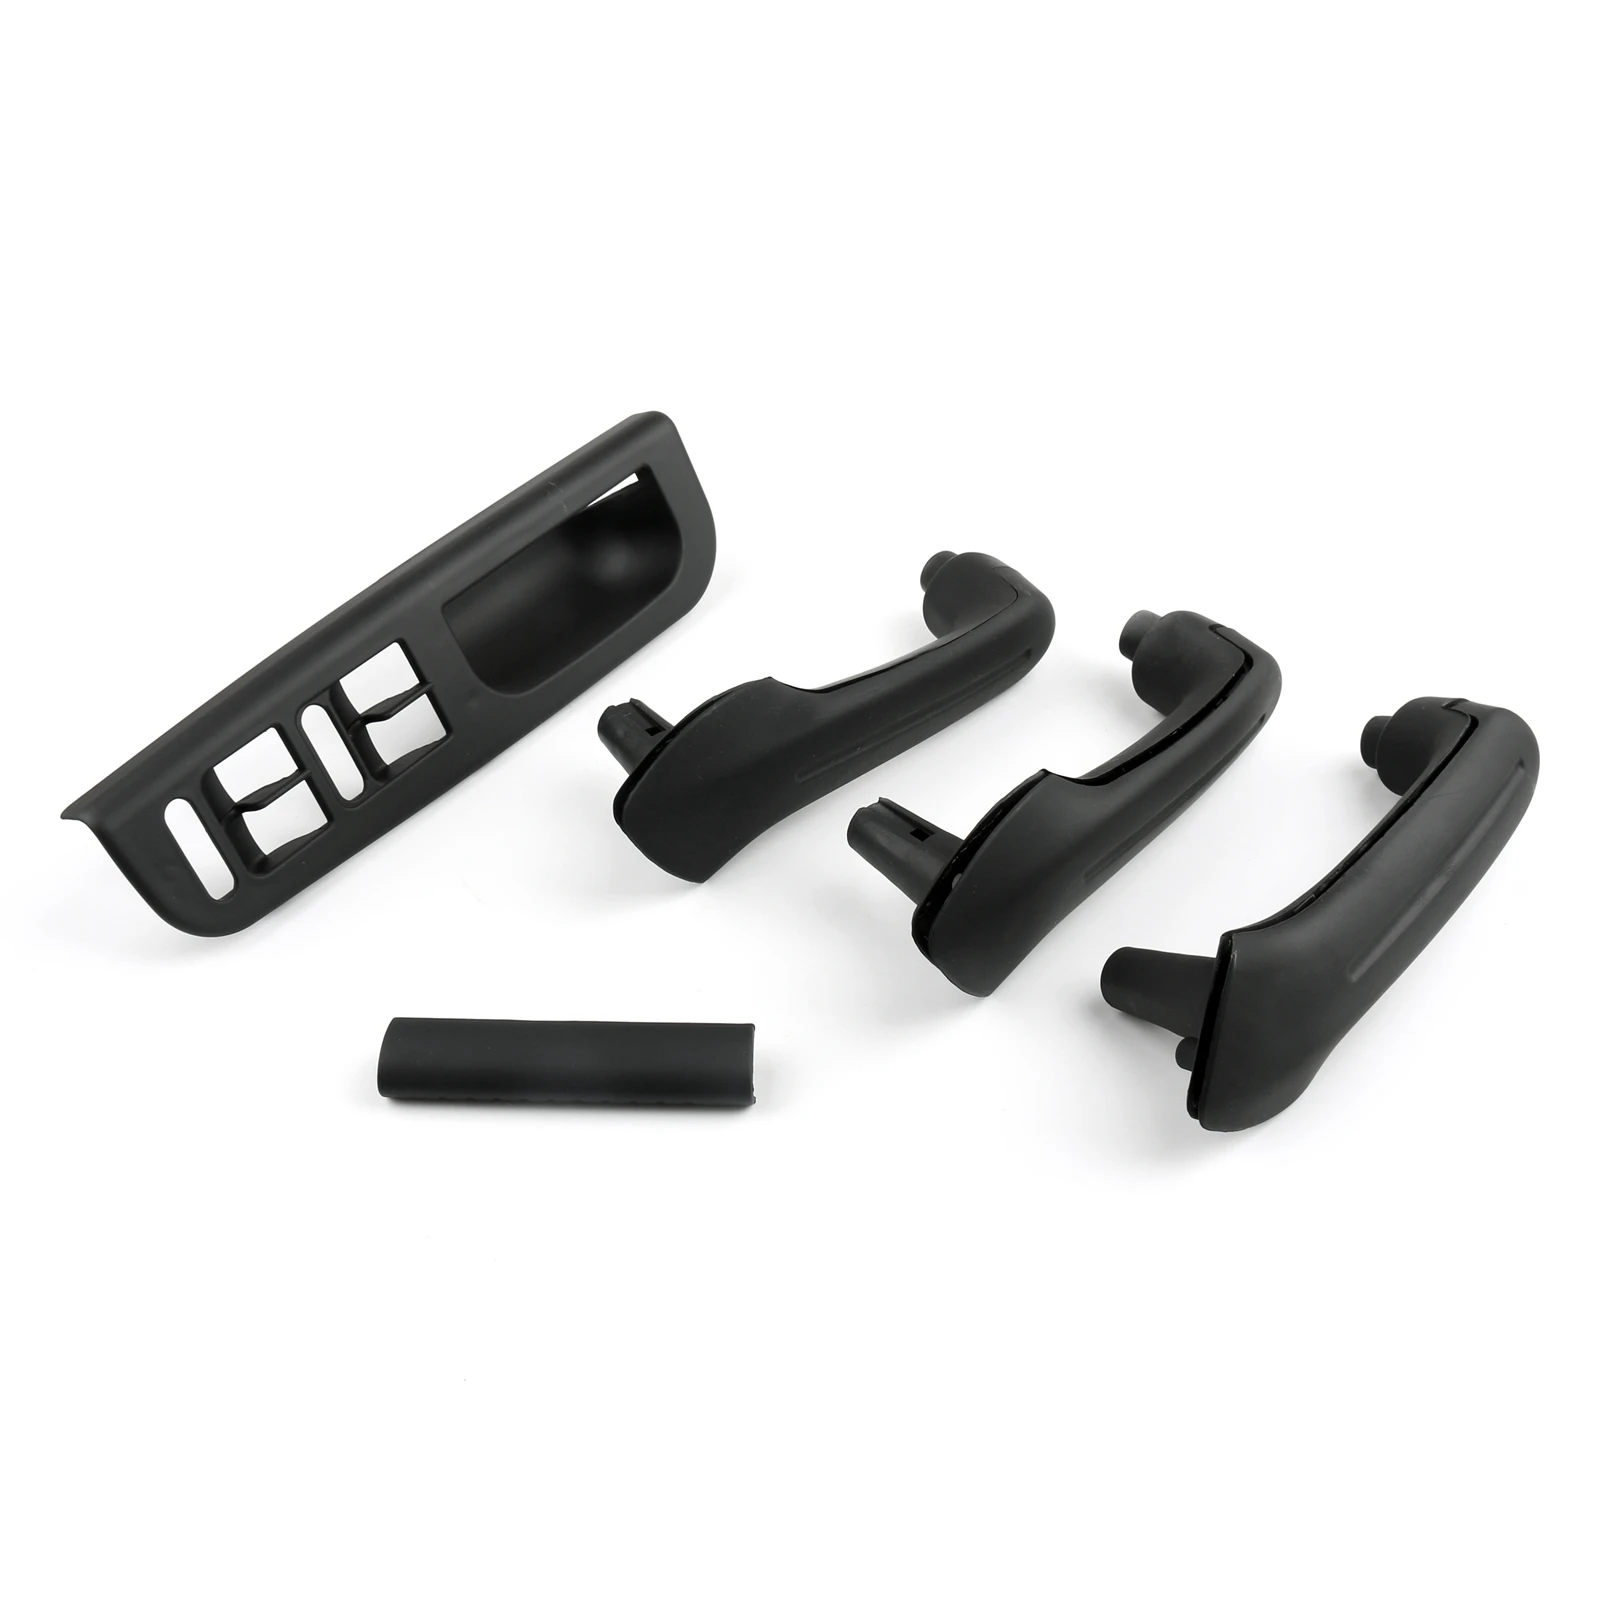 

Areyourshop Black Interior Door Handle Trim Cover For VW For Jetta For Golf MK4 For Bora 1998-2004